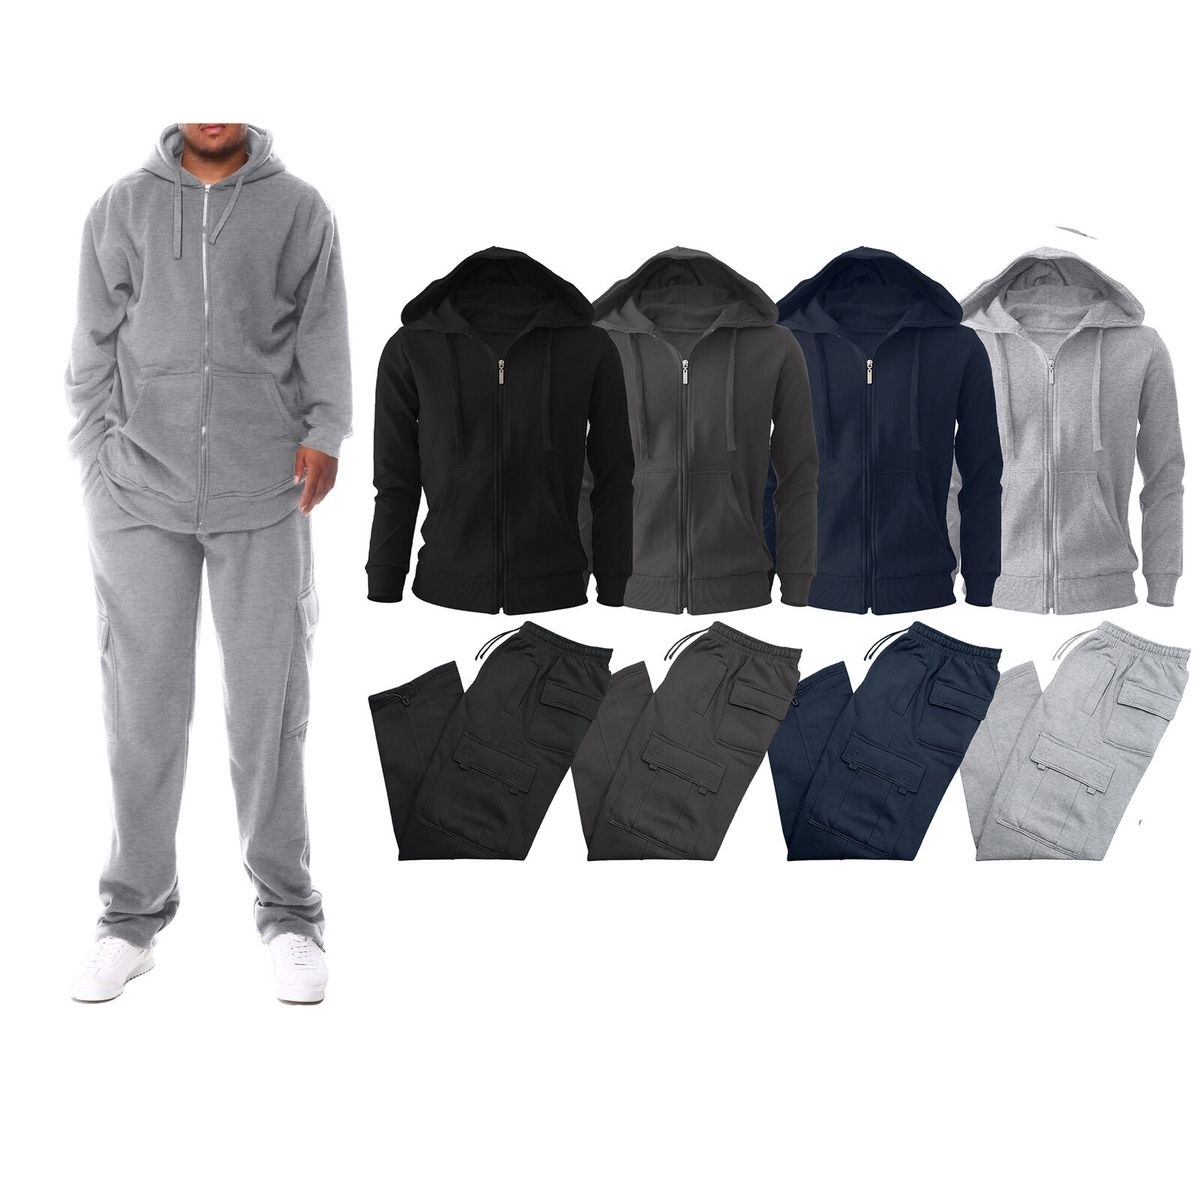 Men's Big & Tall Winter Warm Athletic Active Cozy Fleece Lined Multi-Pocket Full Zip Up Cargo Tracksuit - Charcoal, Xx-large